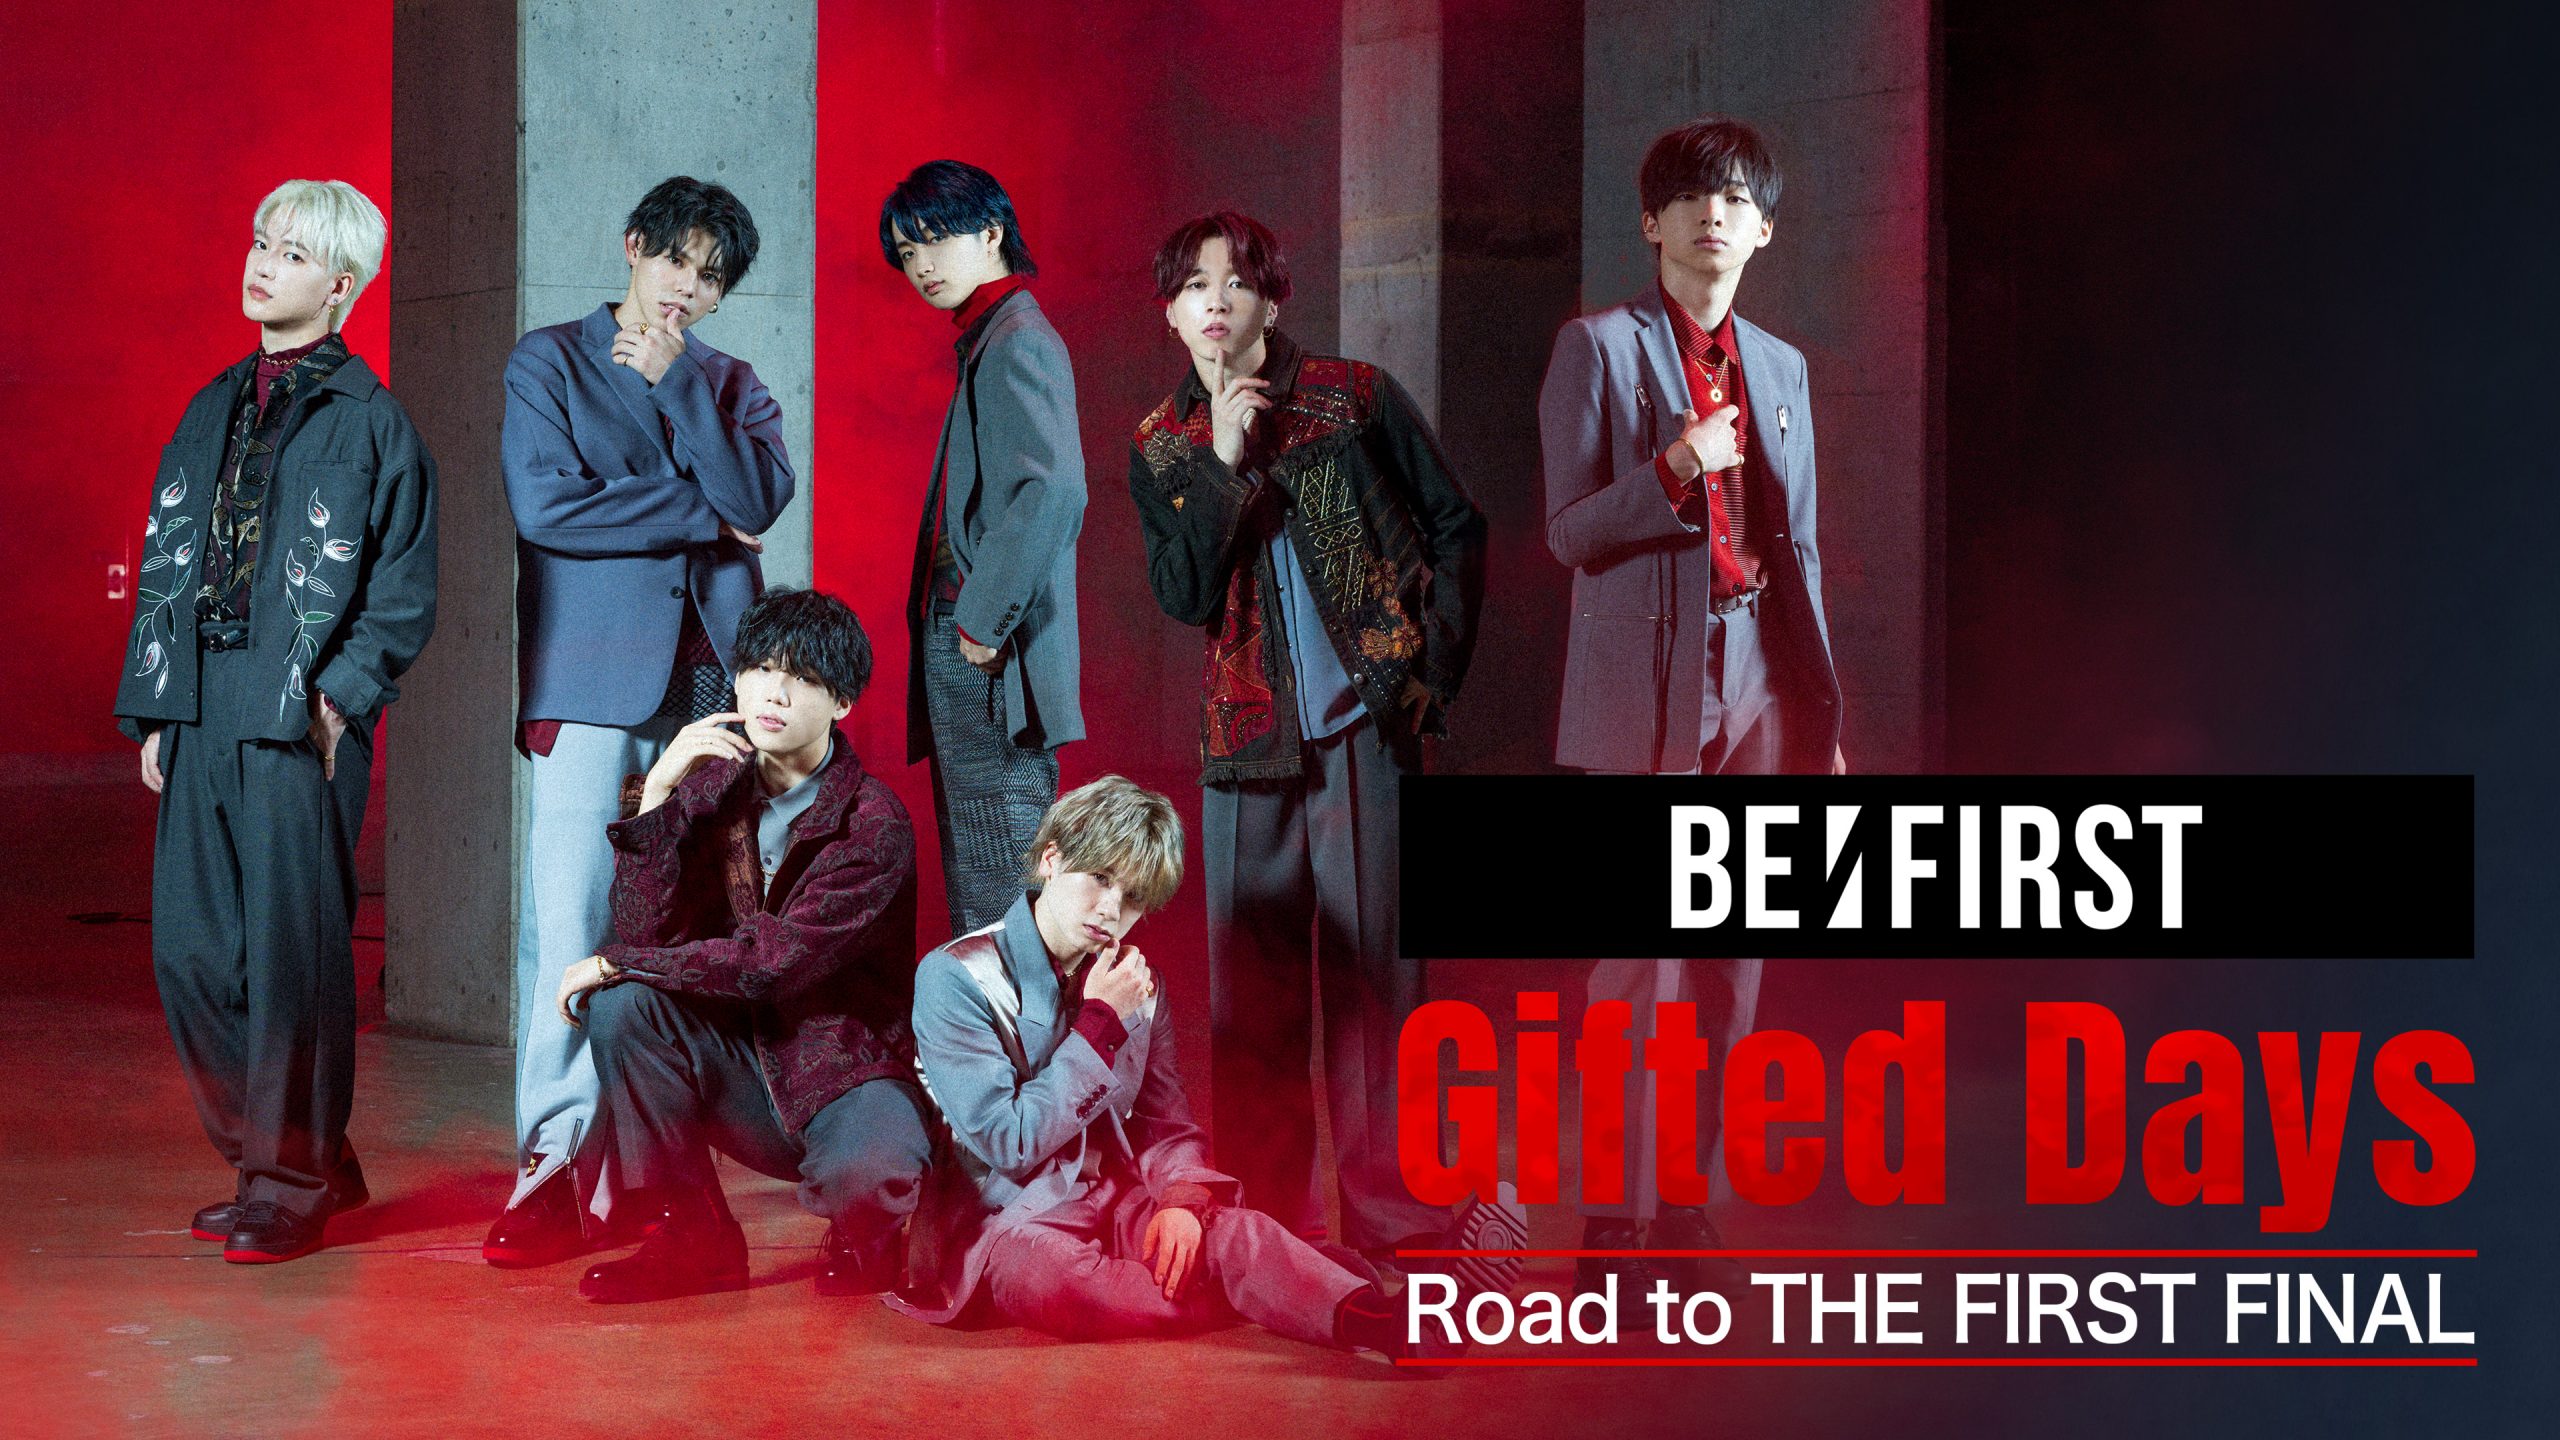 THE FIRST -BMSG Audition 2021- ※「裏･THE FIRST」「あの日のTHE FIRST」「BE:FIRST Gifted Days」も独占配信中